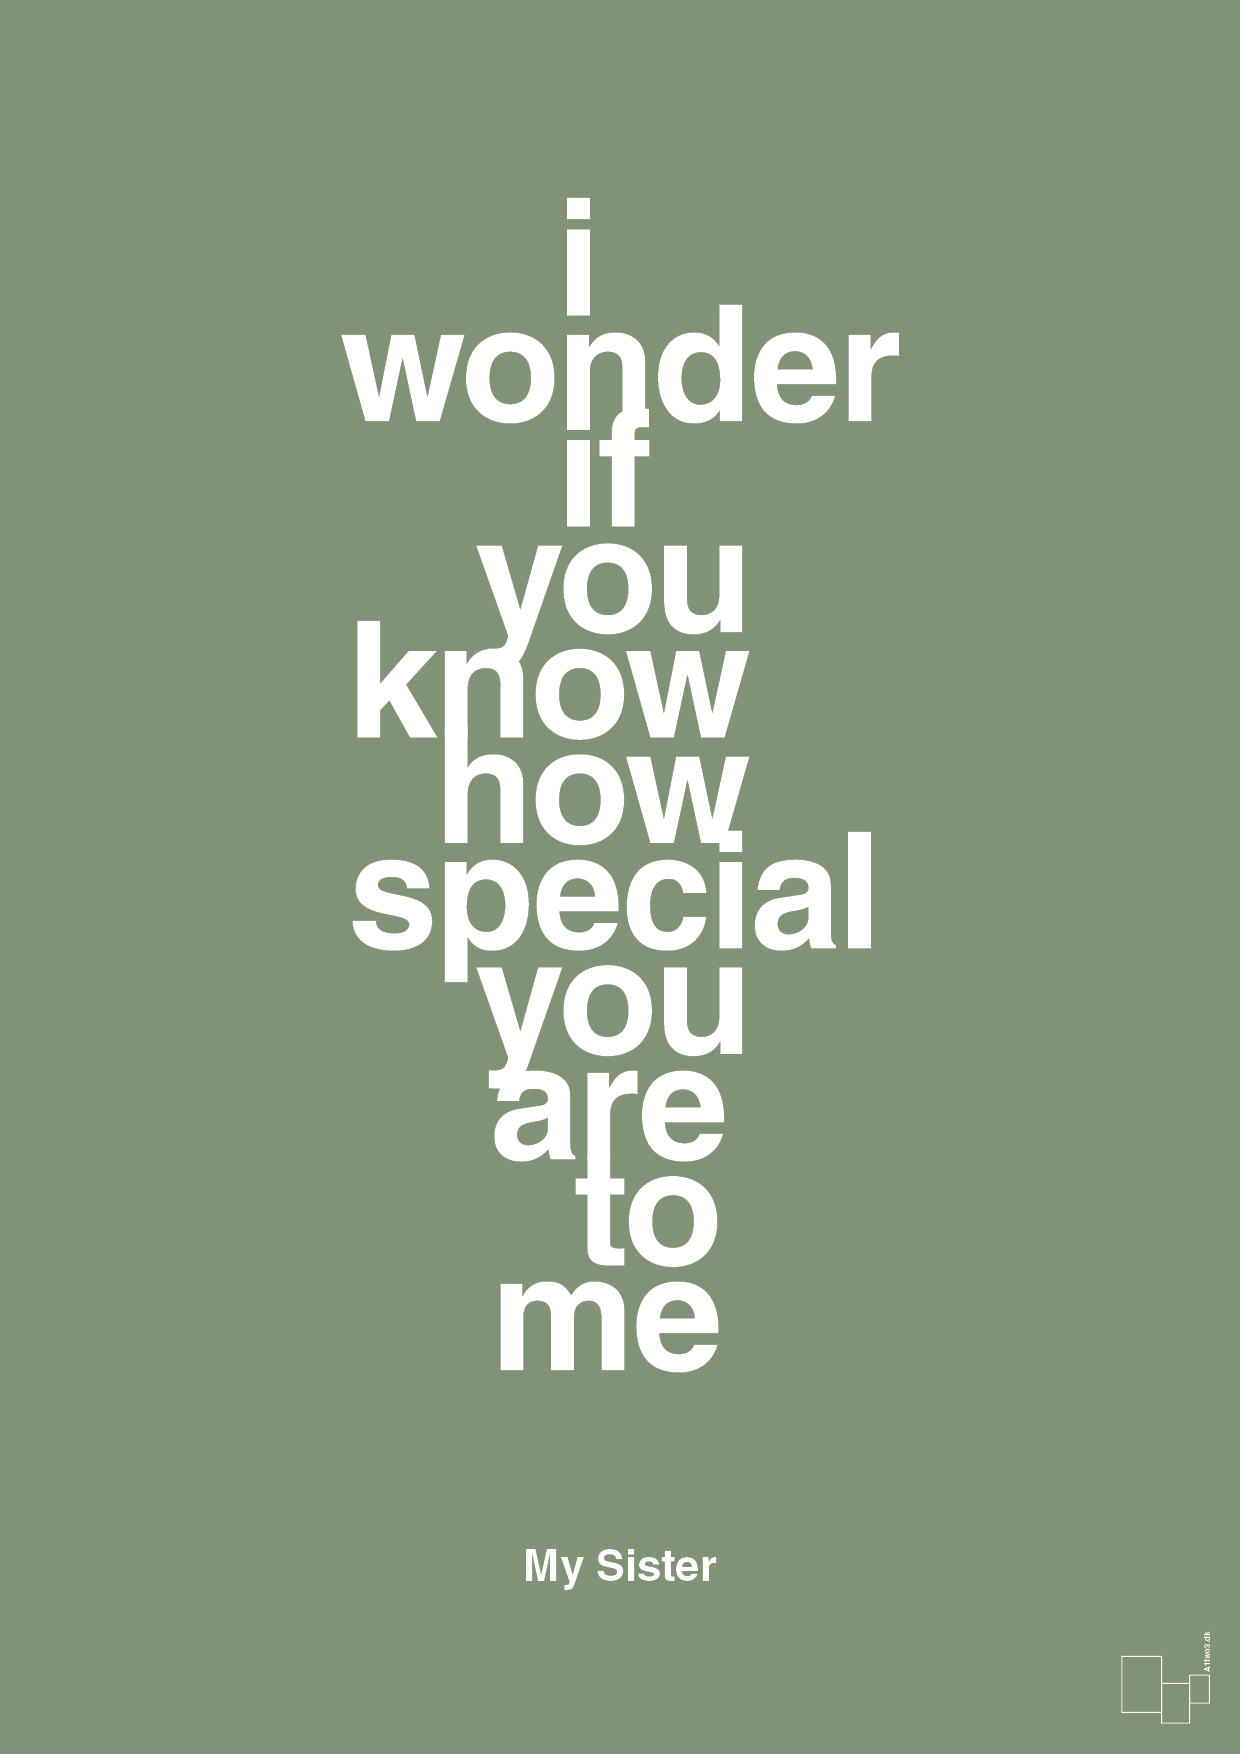 my sister - i wonder if you know how special you are to me - Plakat med Citater i Jade